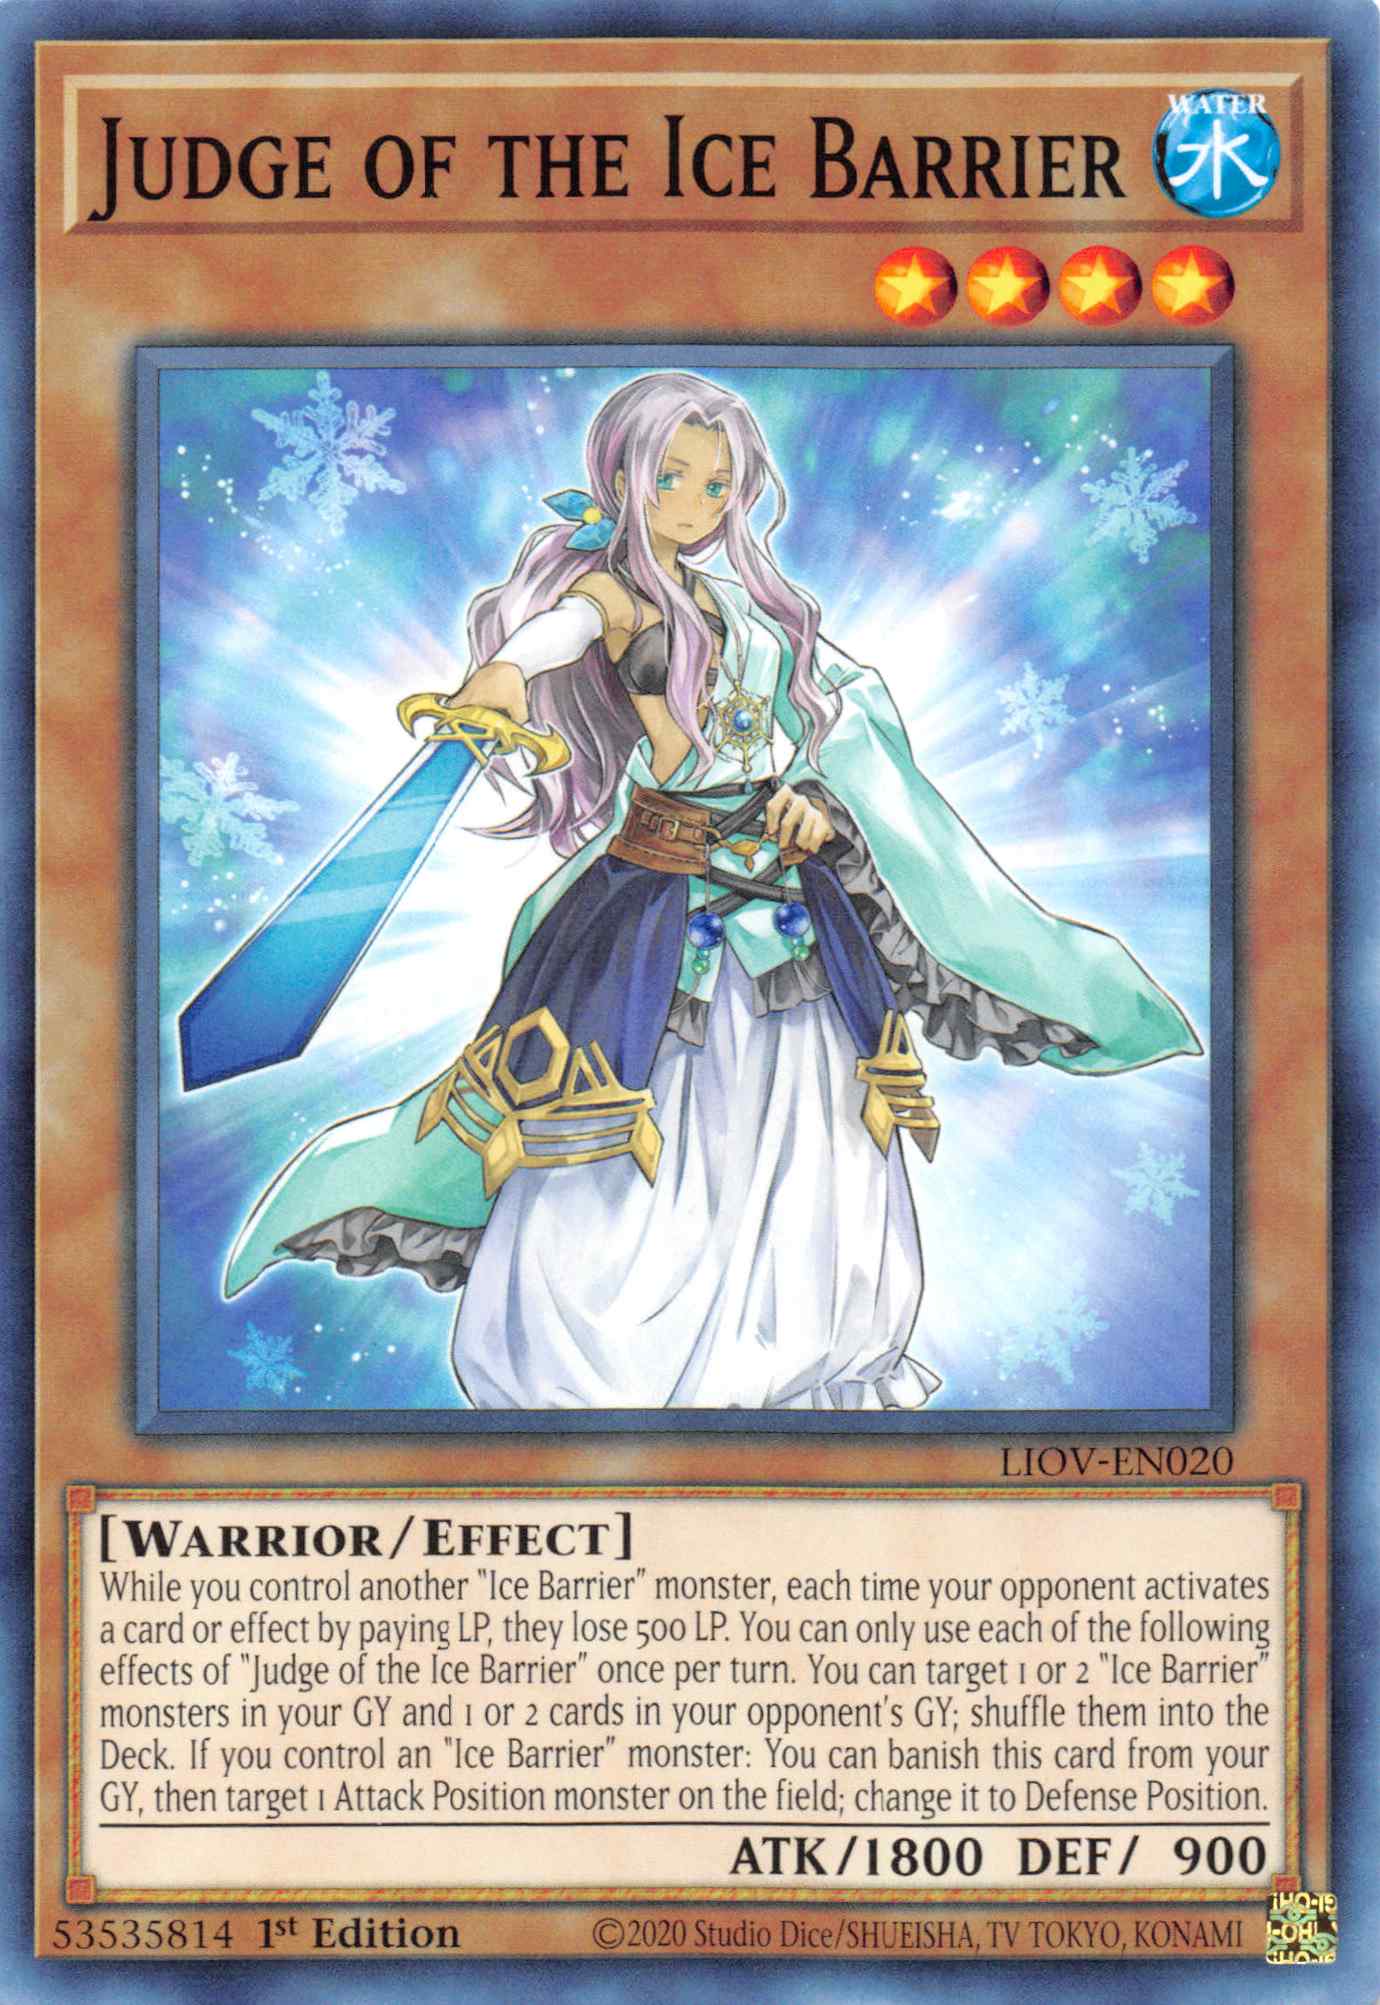 Judge of the Ice Barrier [LIOV-EN020] Common | The CG Realm